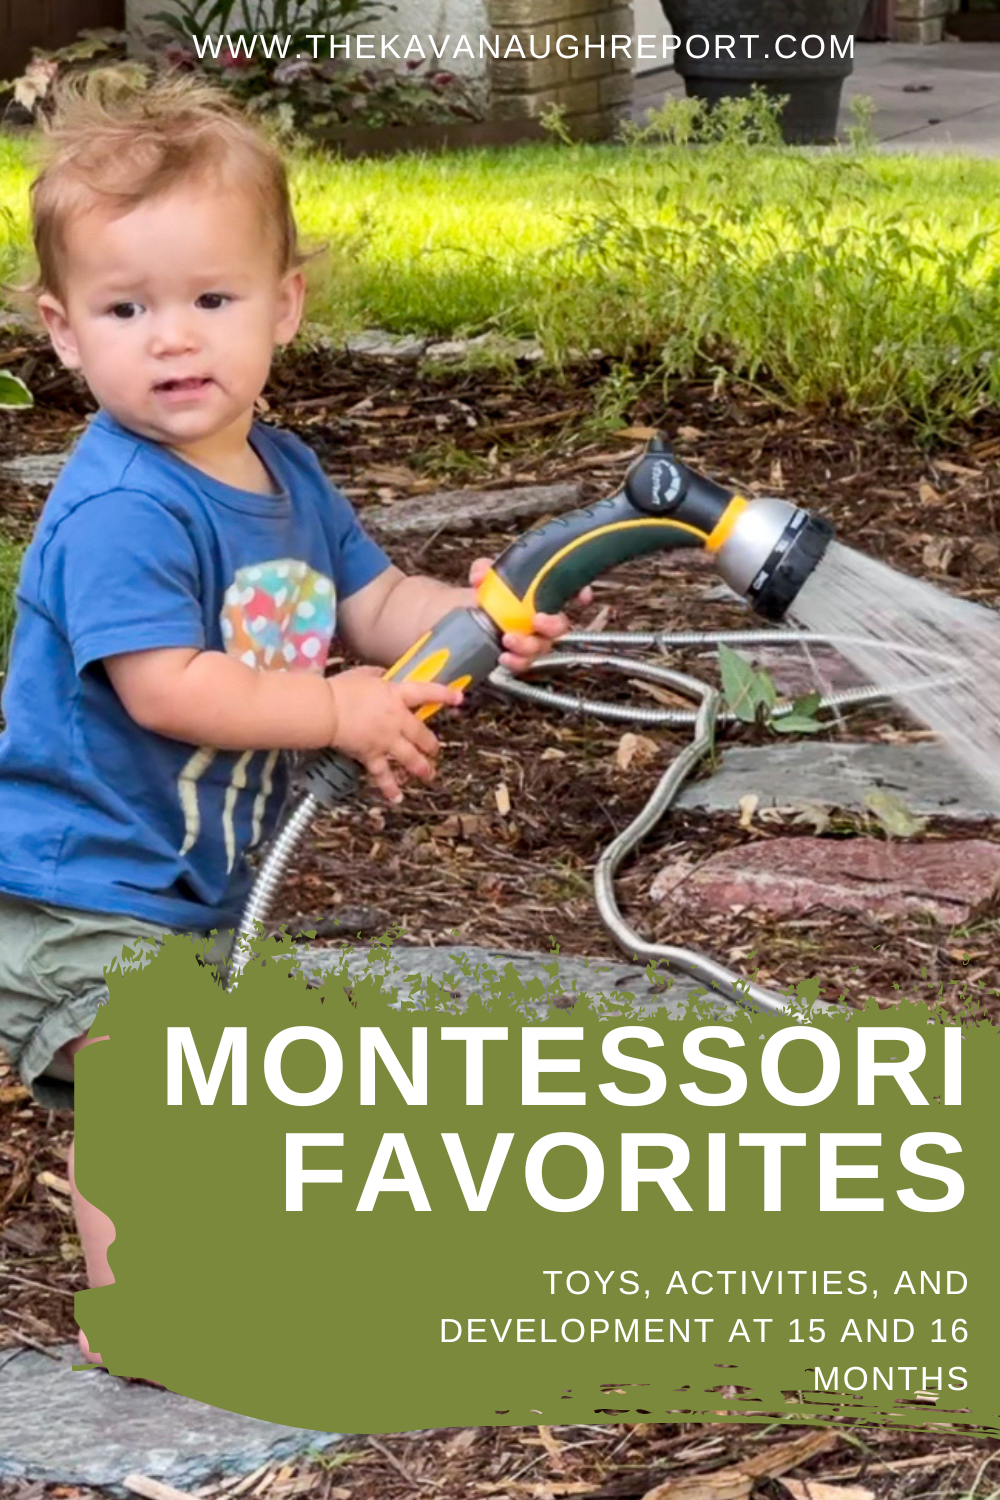 Here's your comprehensive guide to understanding and supporting your toddler's developmental needs at home  from 15-16 months oldwith Montessori-friendly activities. Find out how each activity sharpens a specific skill set- be it fine motor skills, social emotional/language, practical life, or sensory development. Engage in mindful parenting with Montessori methods.